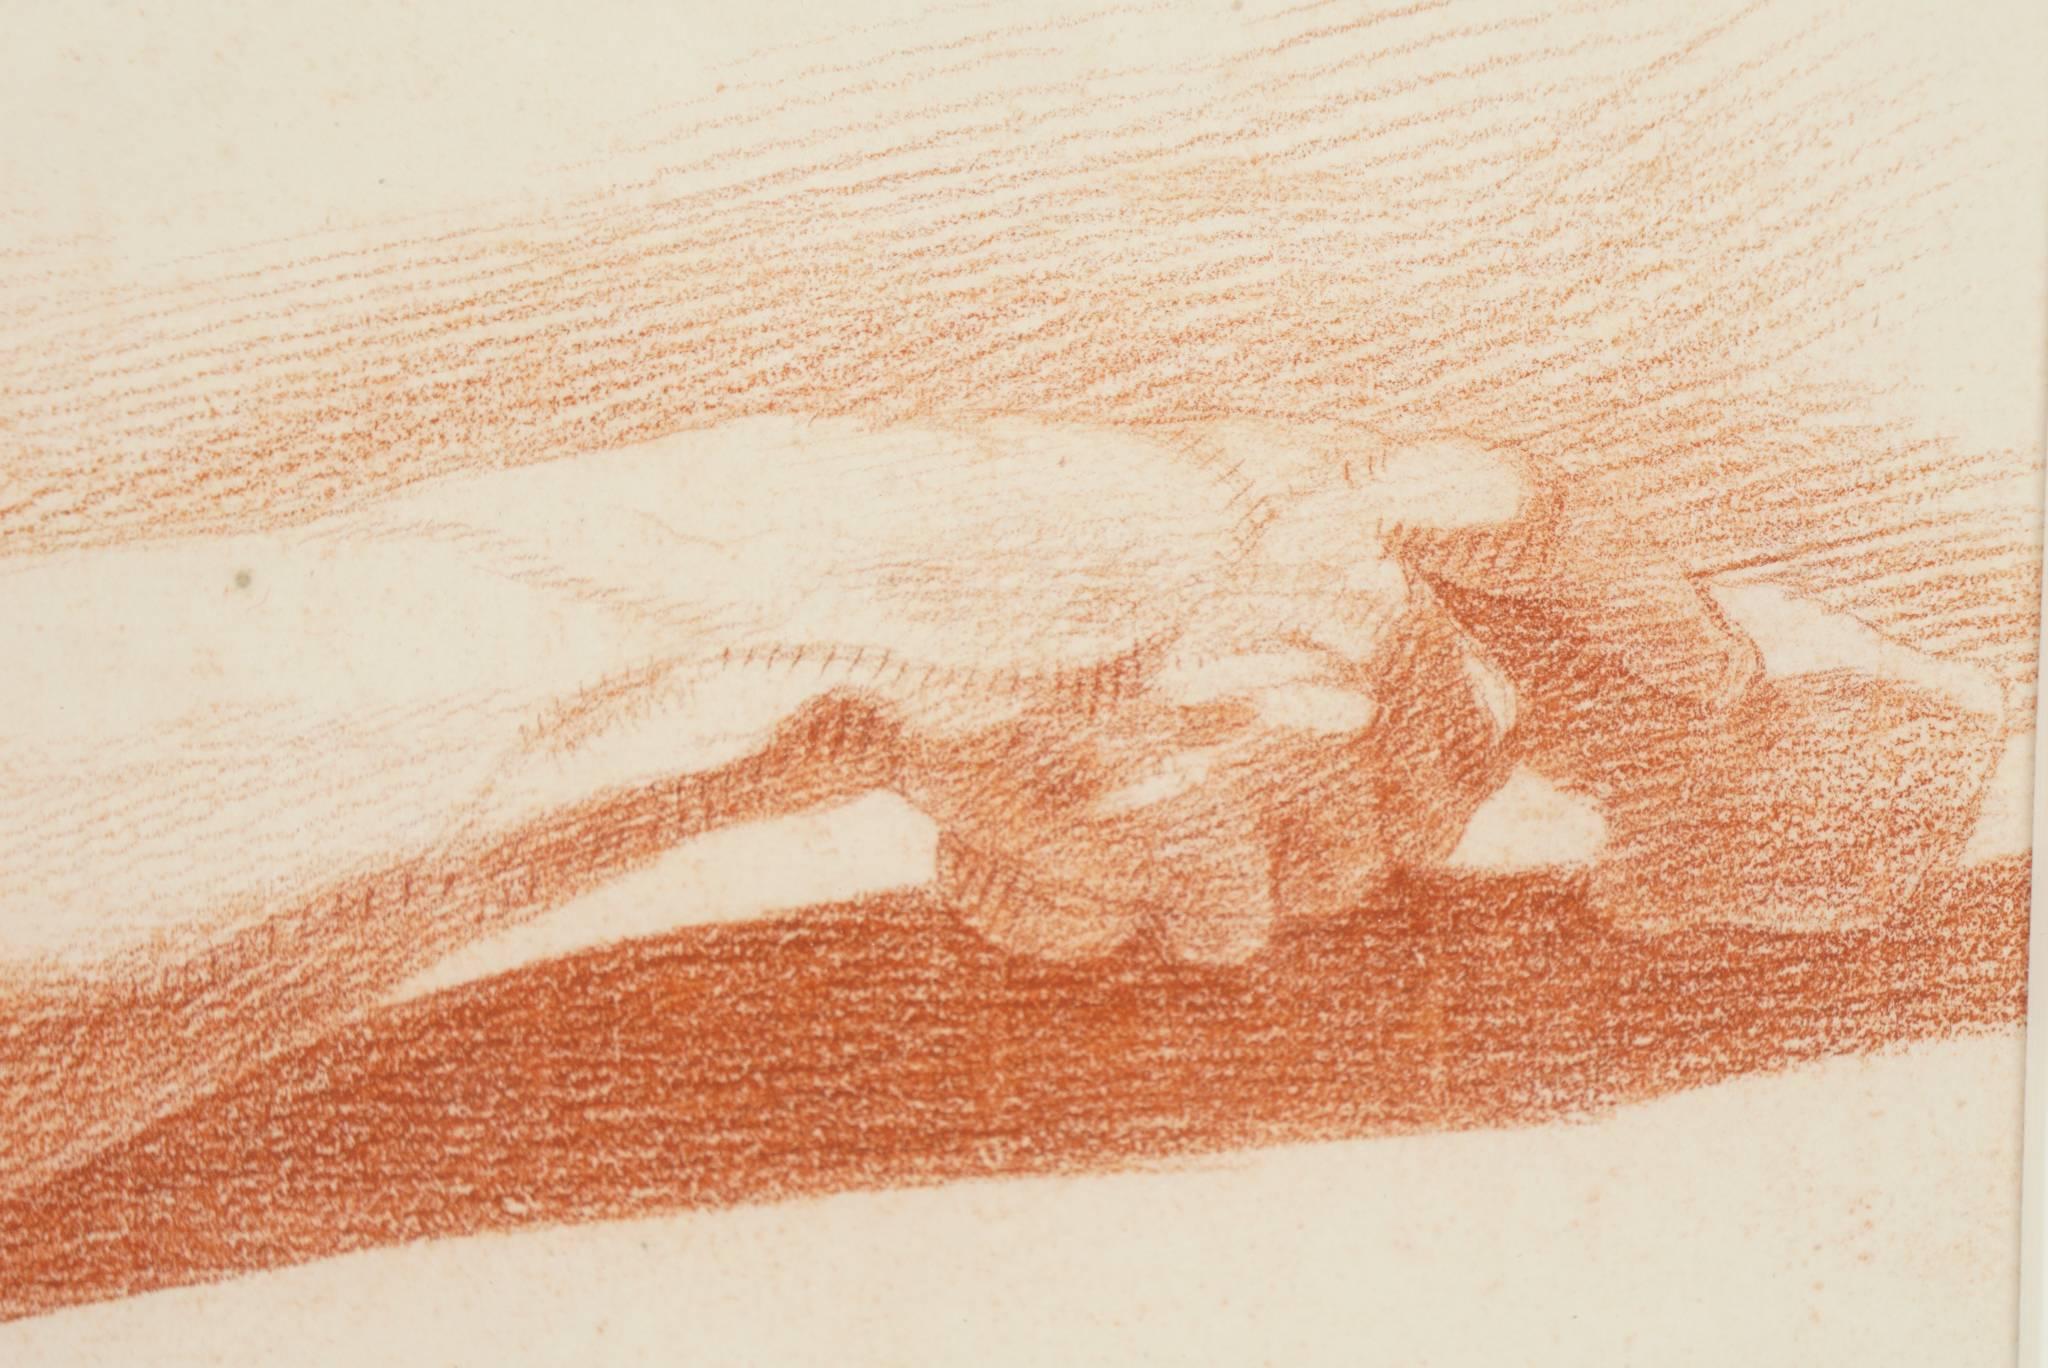 drawing of an arm